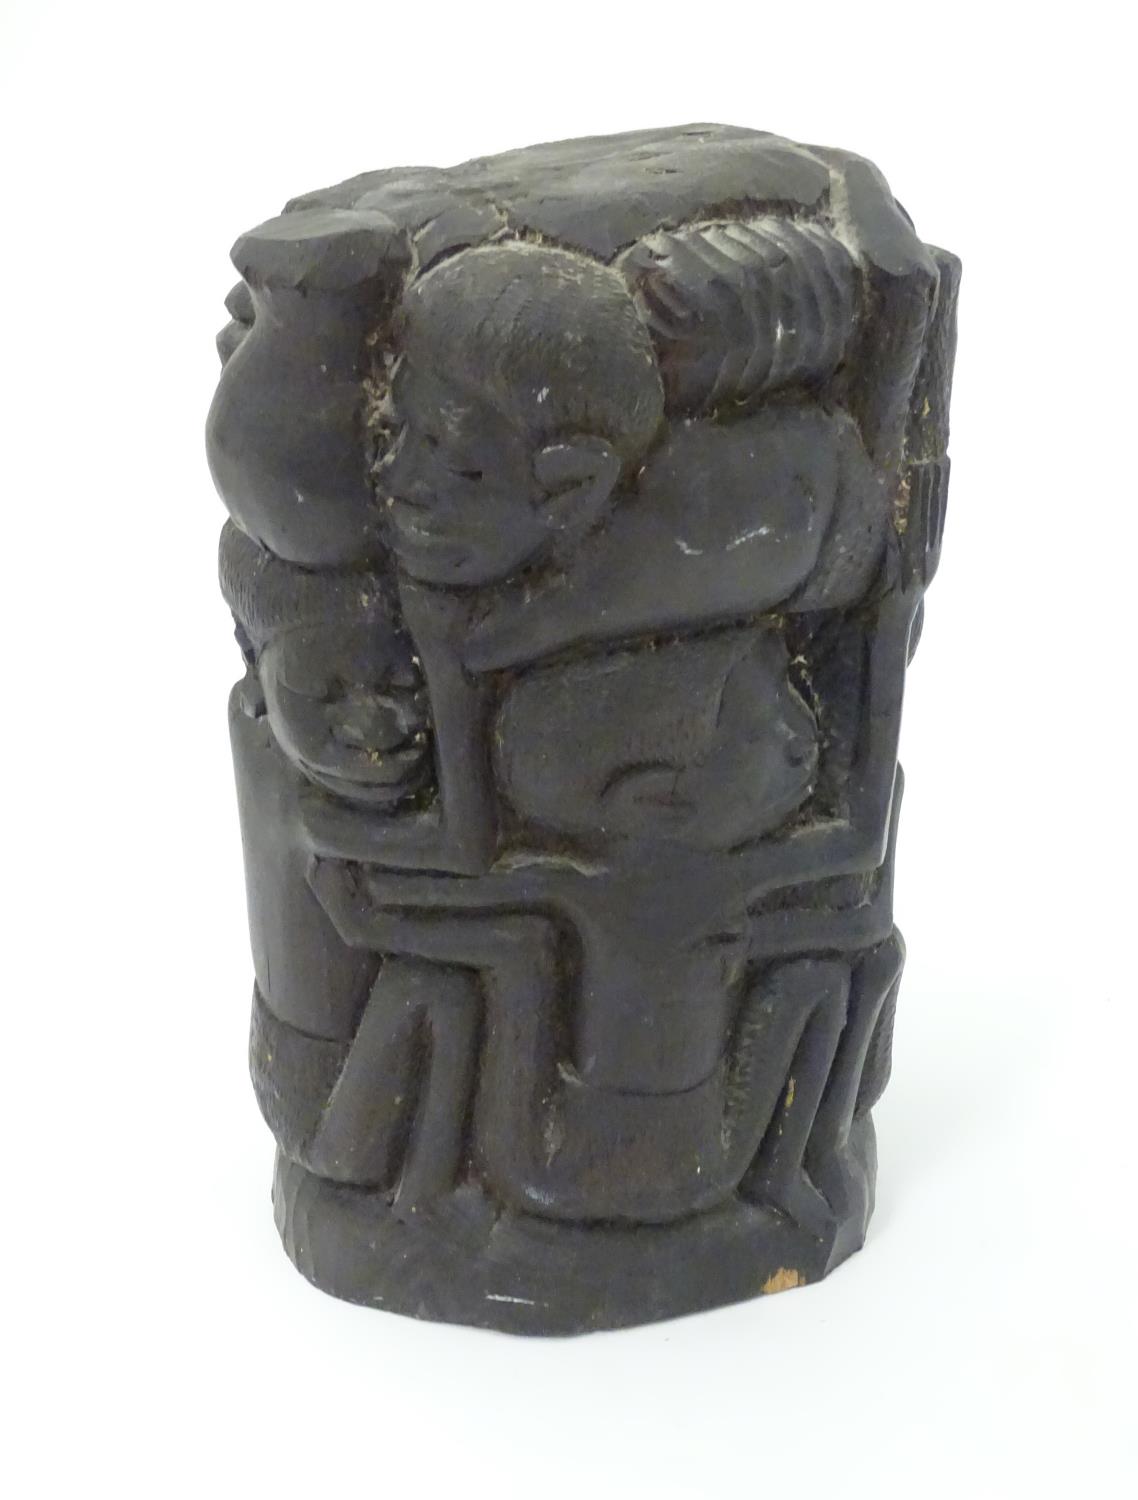 Ethnographic native Tribal : an ebony ? Pounding / chopping block with carved seated figures to the - Image 4 of 5